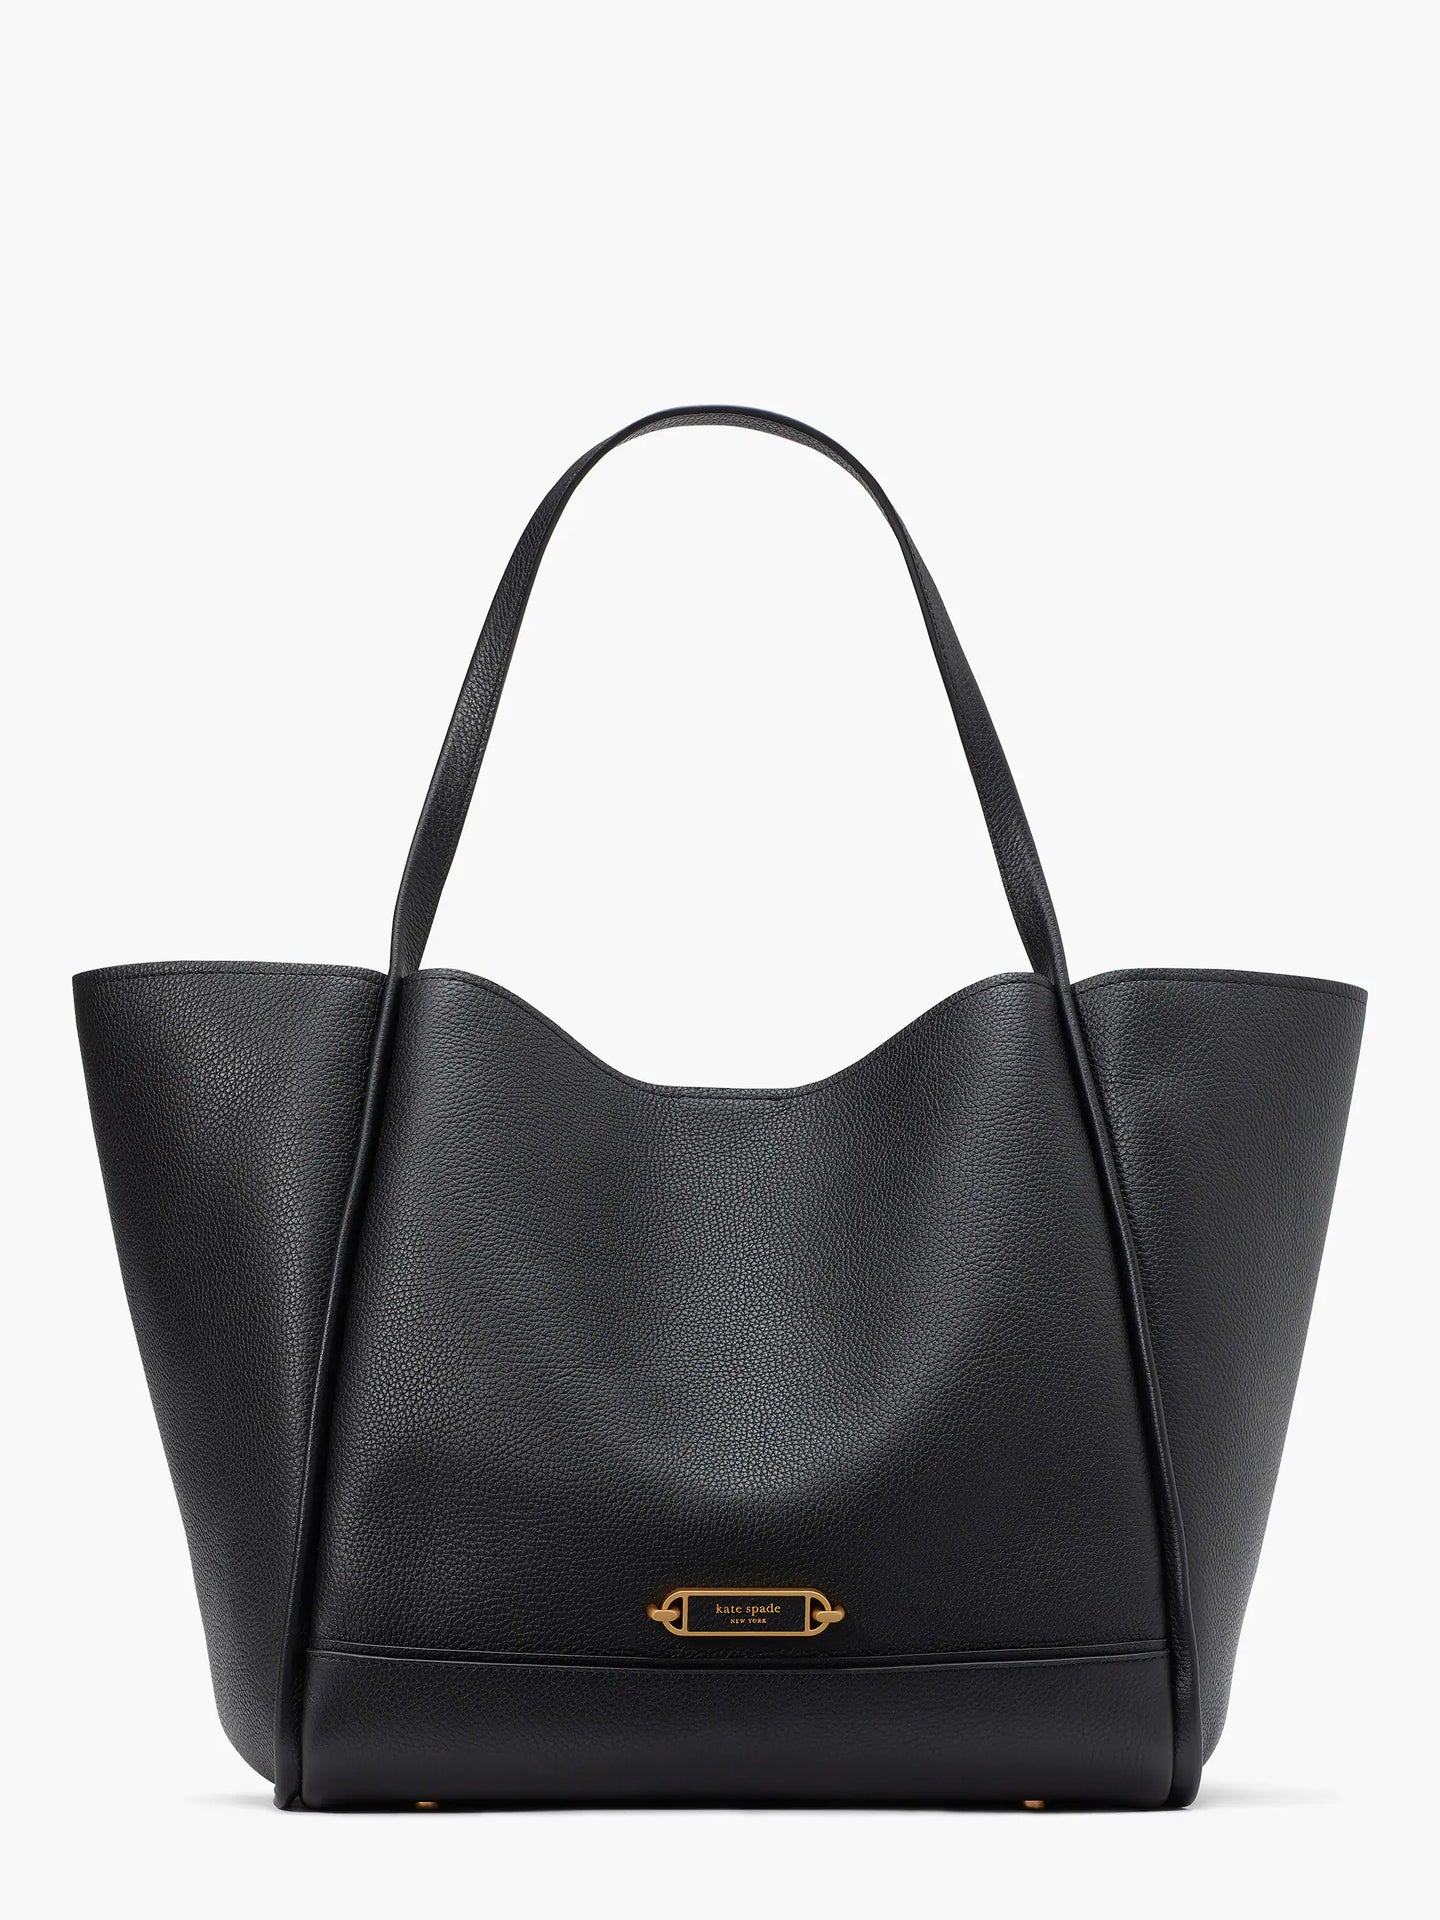 GRAMERCY LARGE TOTE